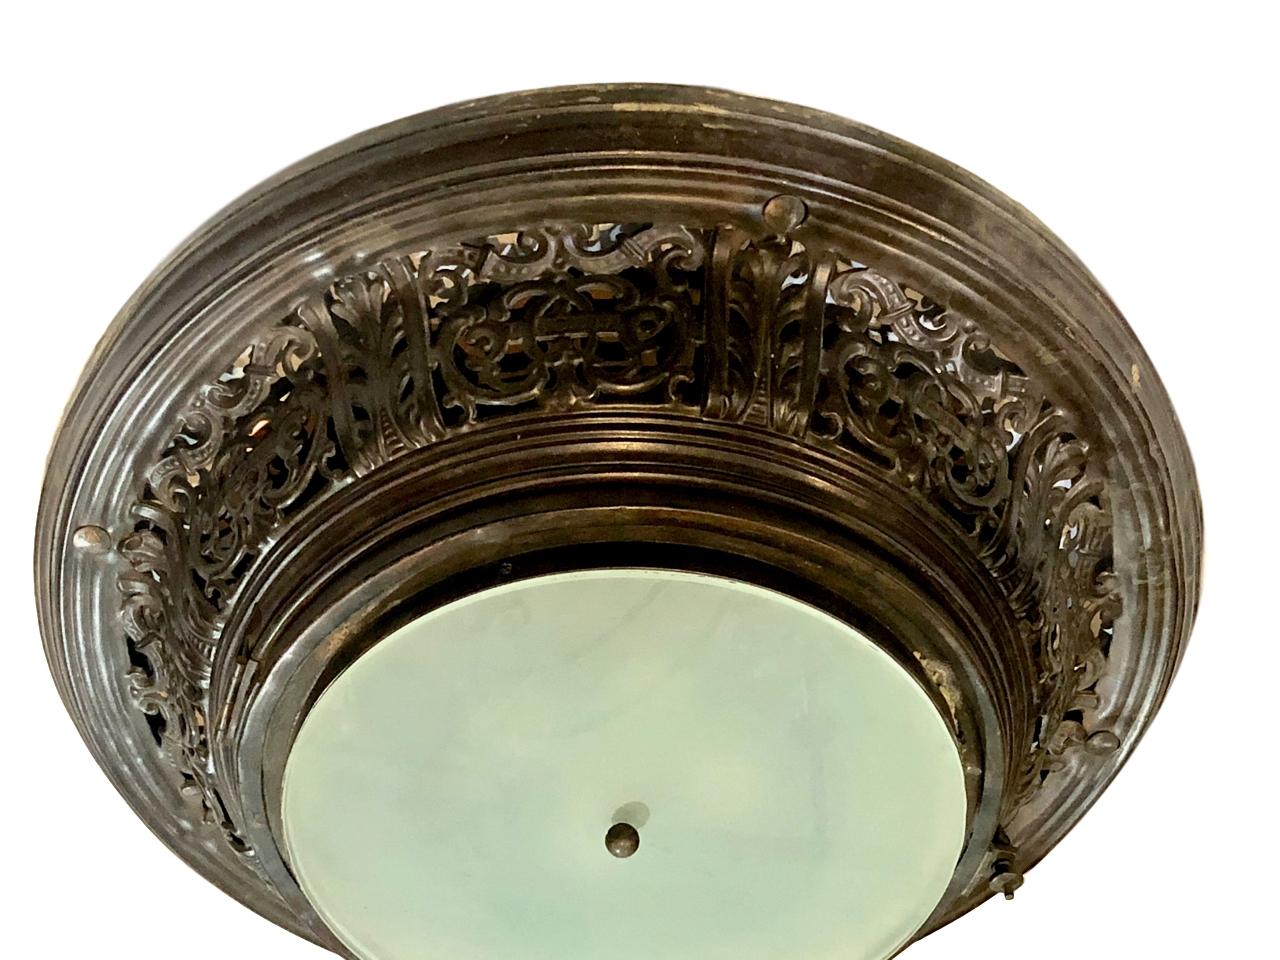 A circa 1910 French semi-flush antique bronze pierced light fixture with frosted glass inset.

Measurements:
Diameter 27